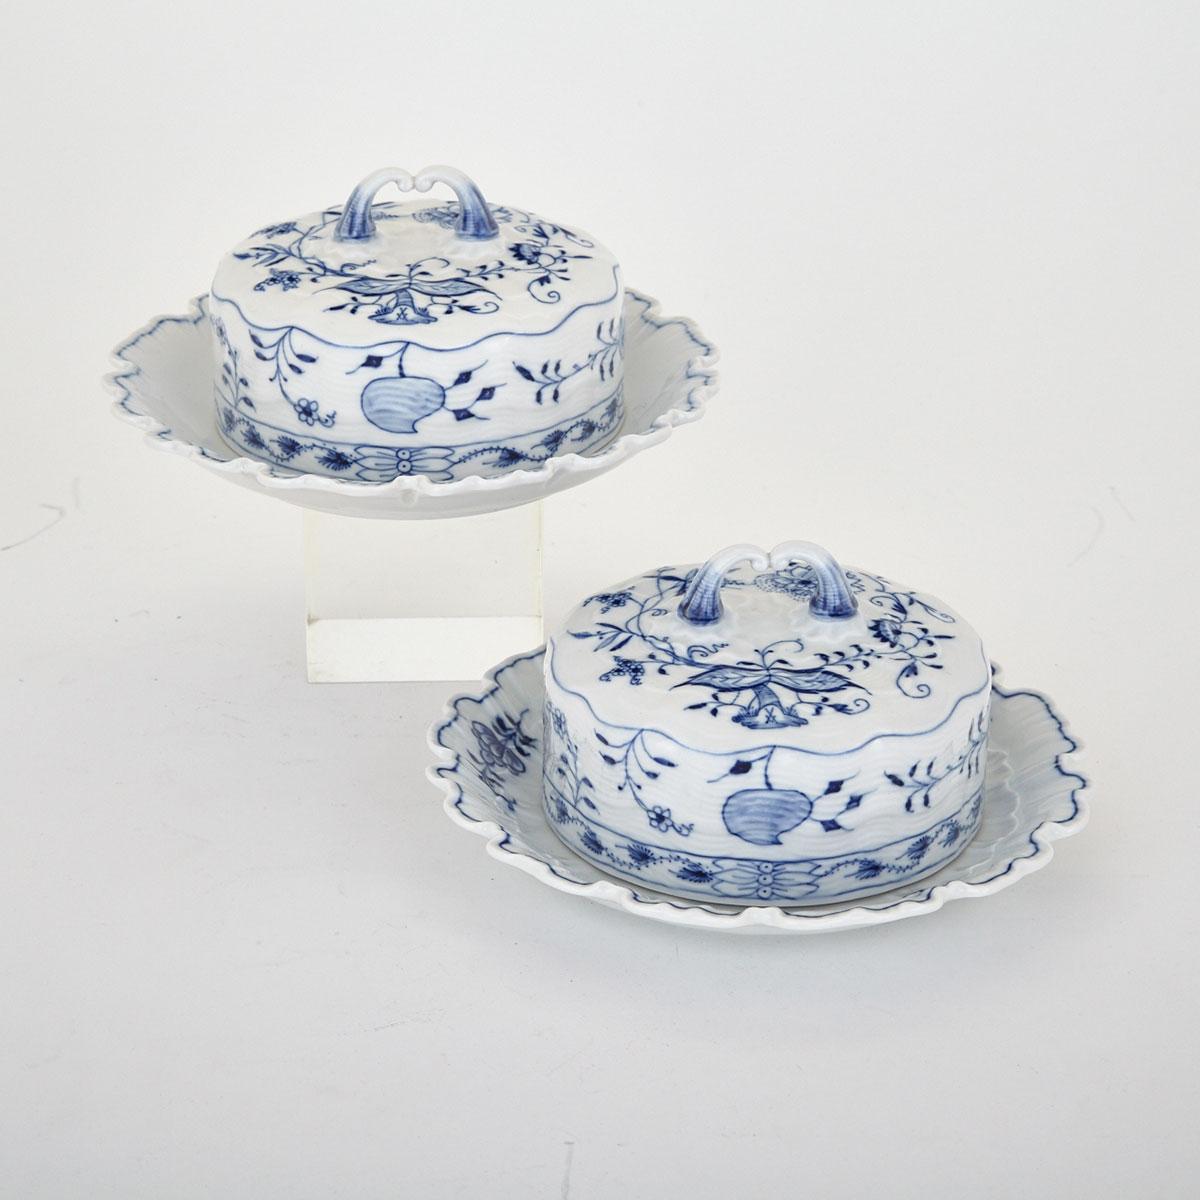 Pair of Meissen Blue Onion Pattern Covered Dishes, late 19th century